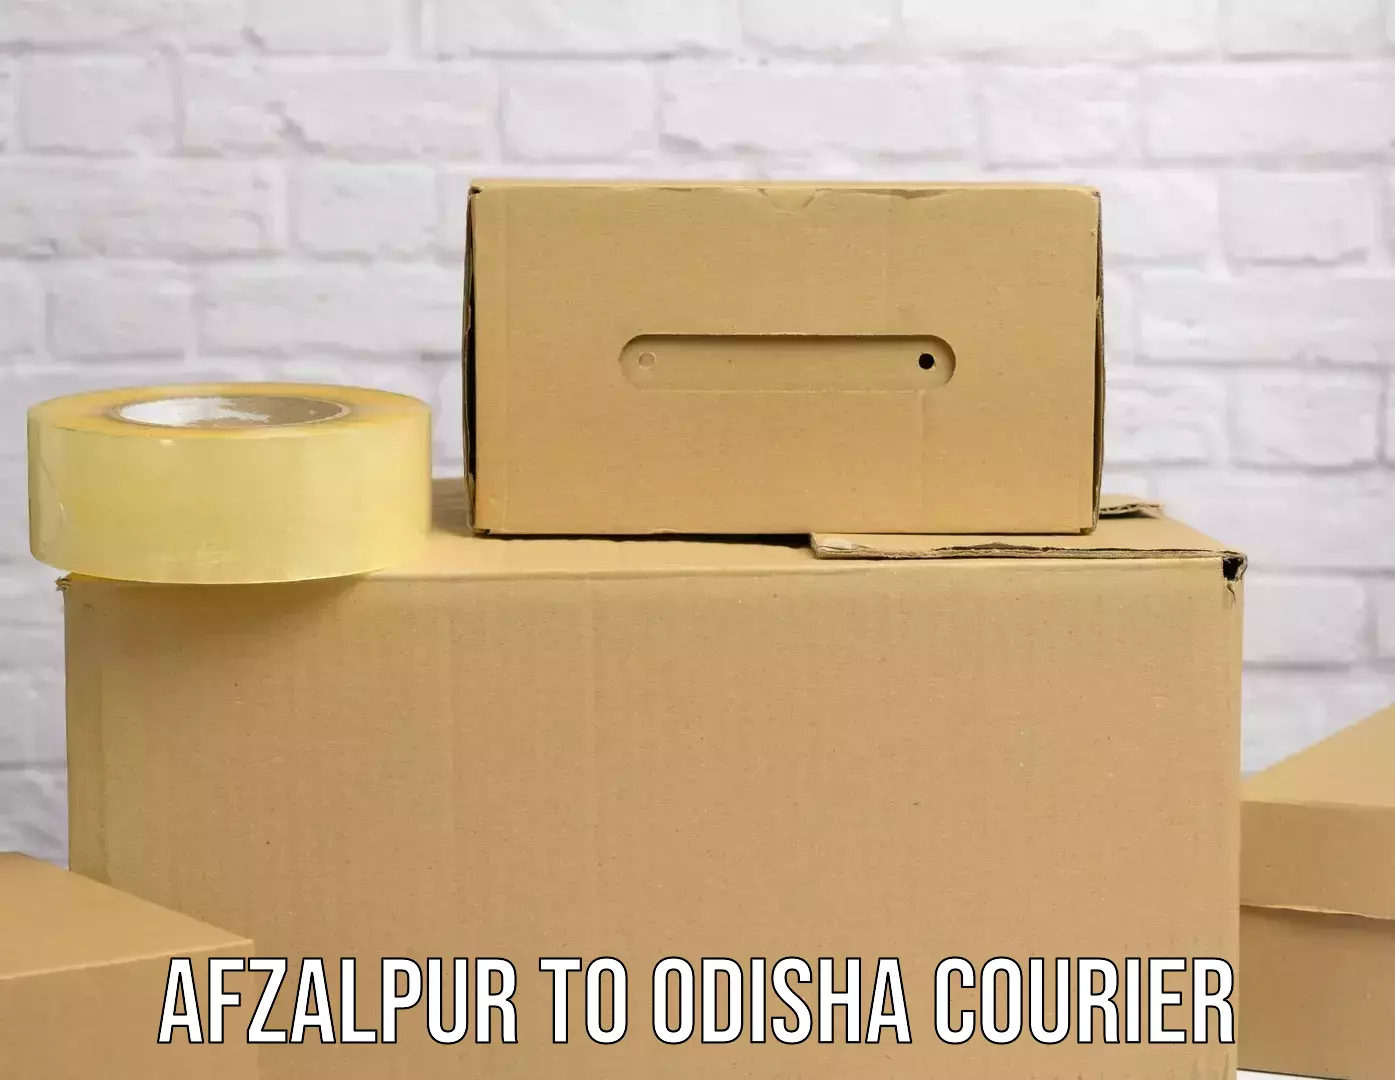 Same-day delivery solutions Afzalpur to Anandapur